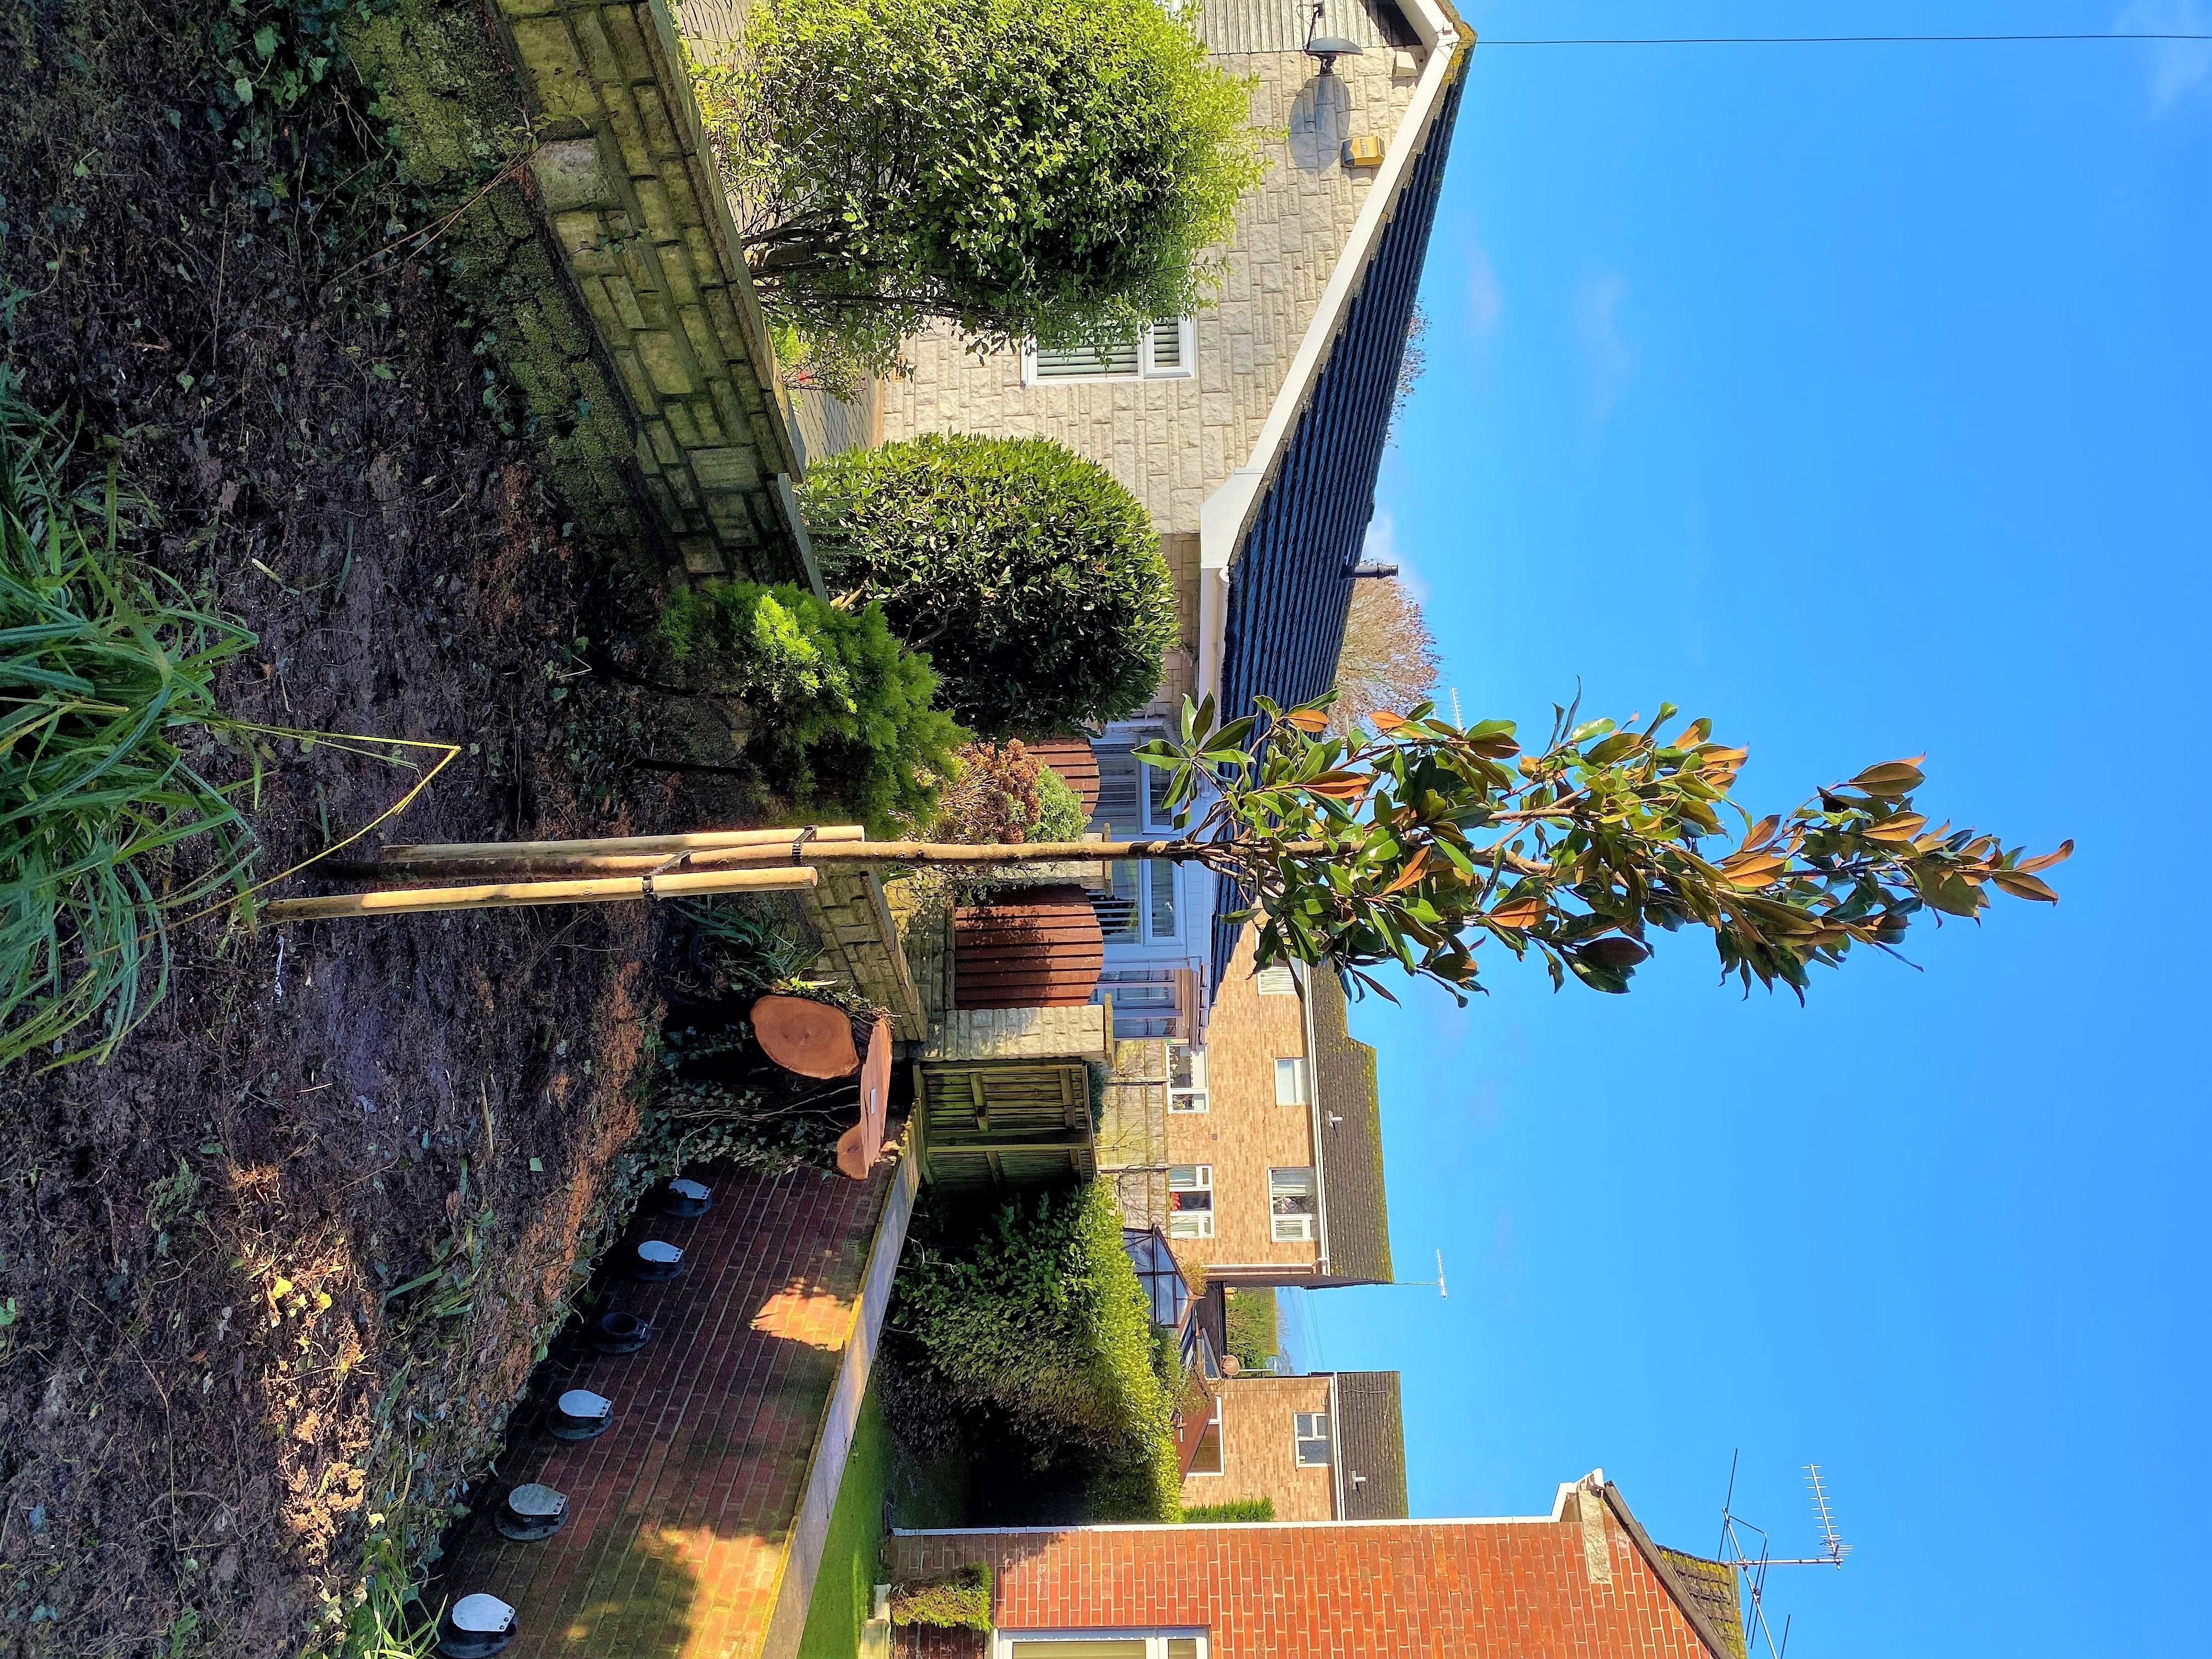 Dorset Treeworx | Tree & hedge planting services in Weymouth, Portland, Dorchester in South Dorset